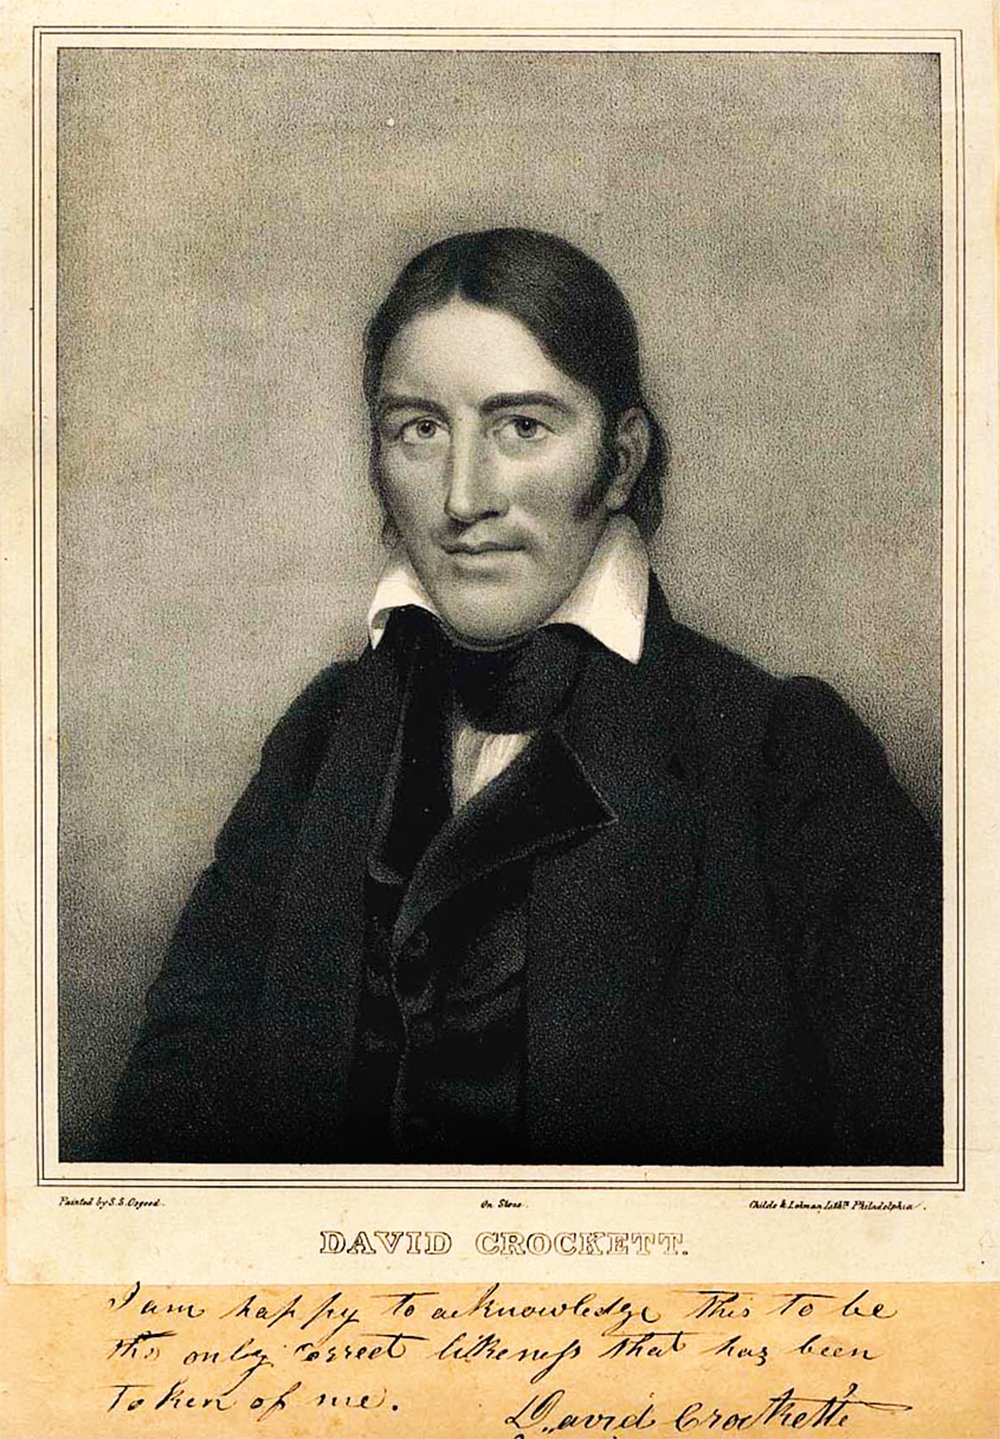 A vintage portrait of David Crockett, depicted in grayscale. Crockett is presented from the chest up, wearing a dark jacket and white collar. He has a stern expression and looks directly at the viewer. Below the portrait, there's handwritten text that reads, 'I am happy to acknowledge this to be the only correct likeness that has been taken of me. - David Crockett.